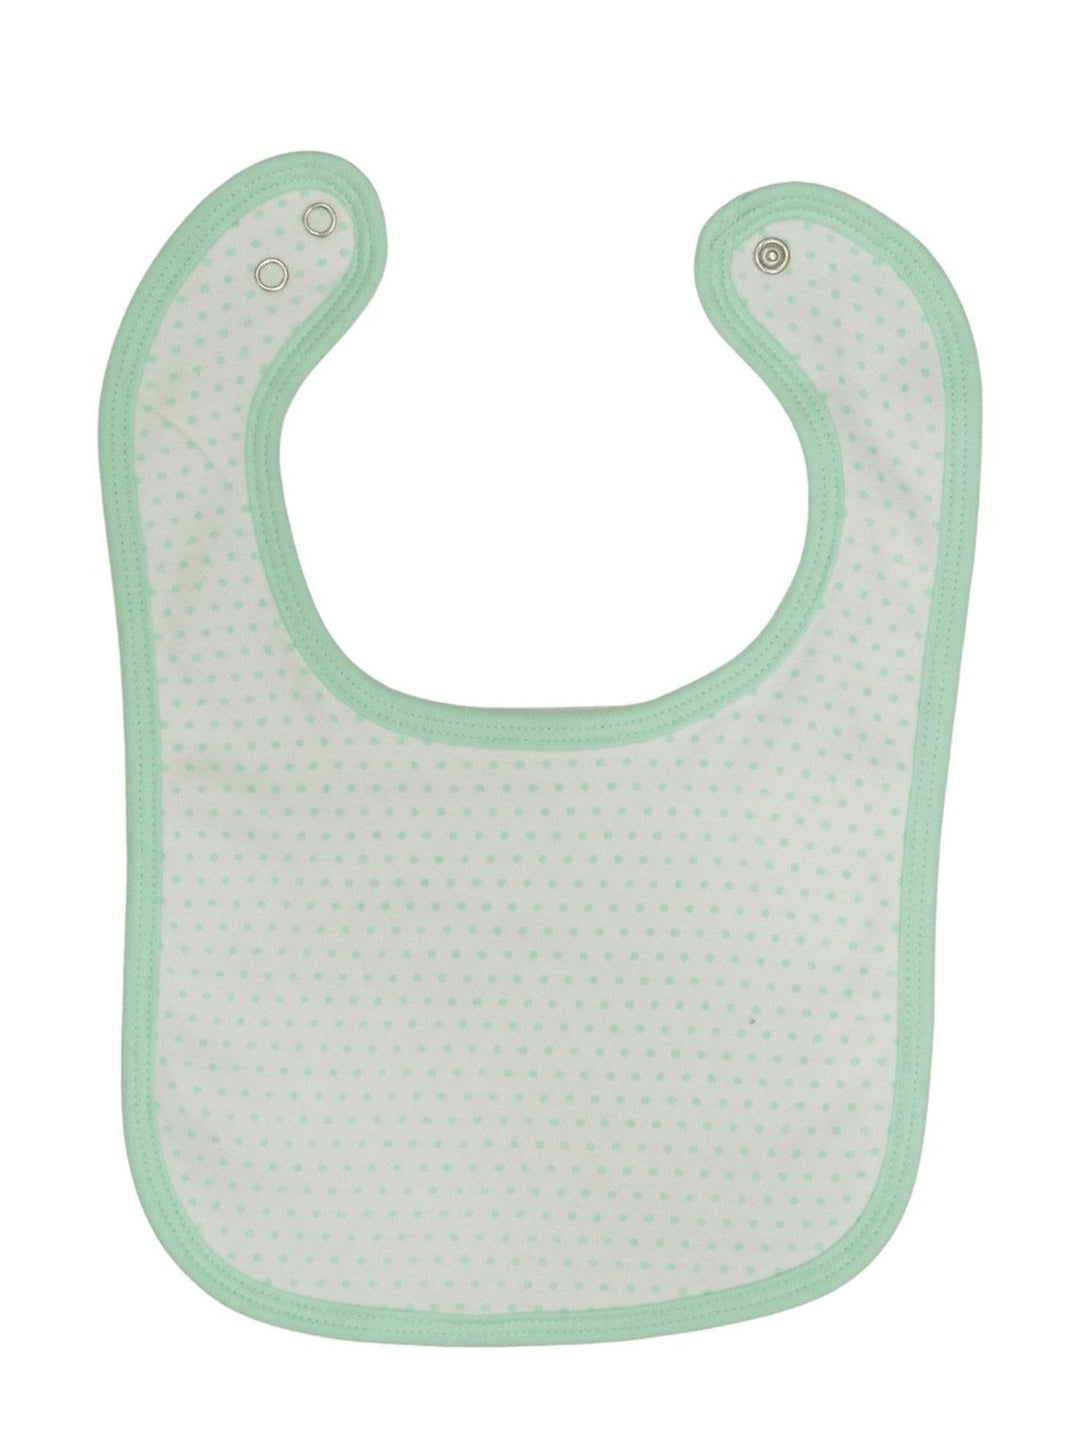 NewbornSnap Bib - Available in 4 ColorsPassion Lilie